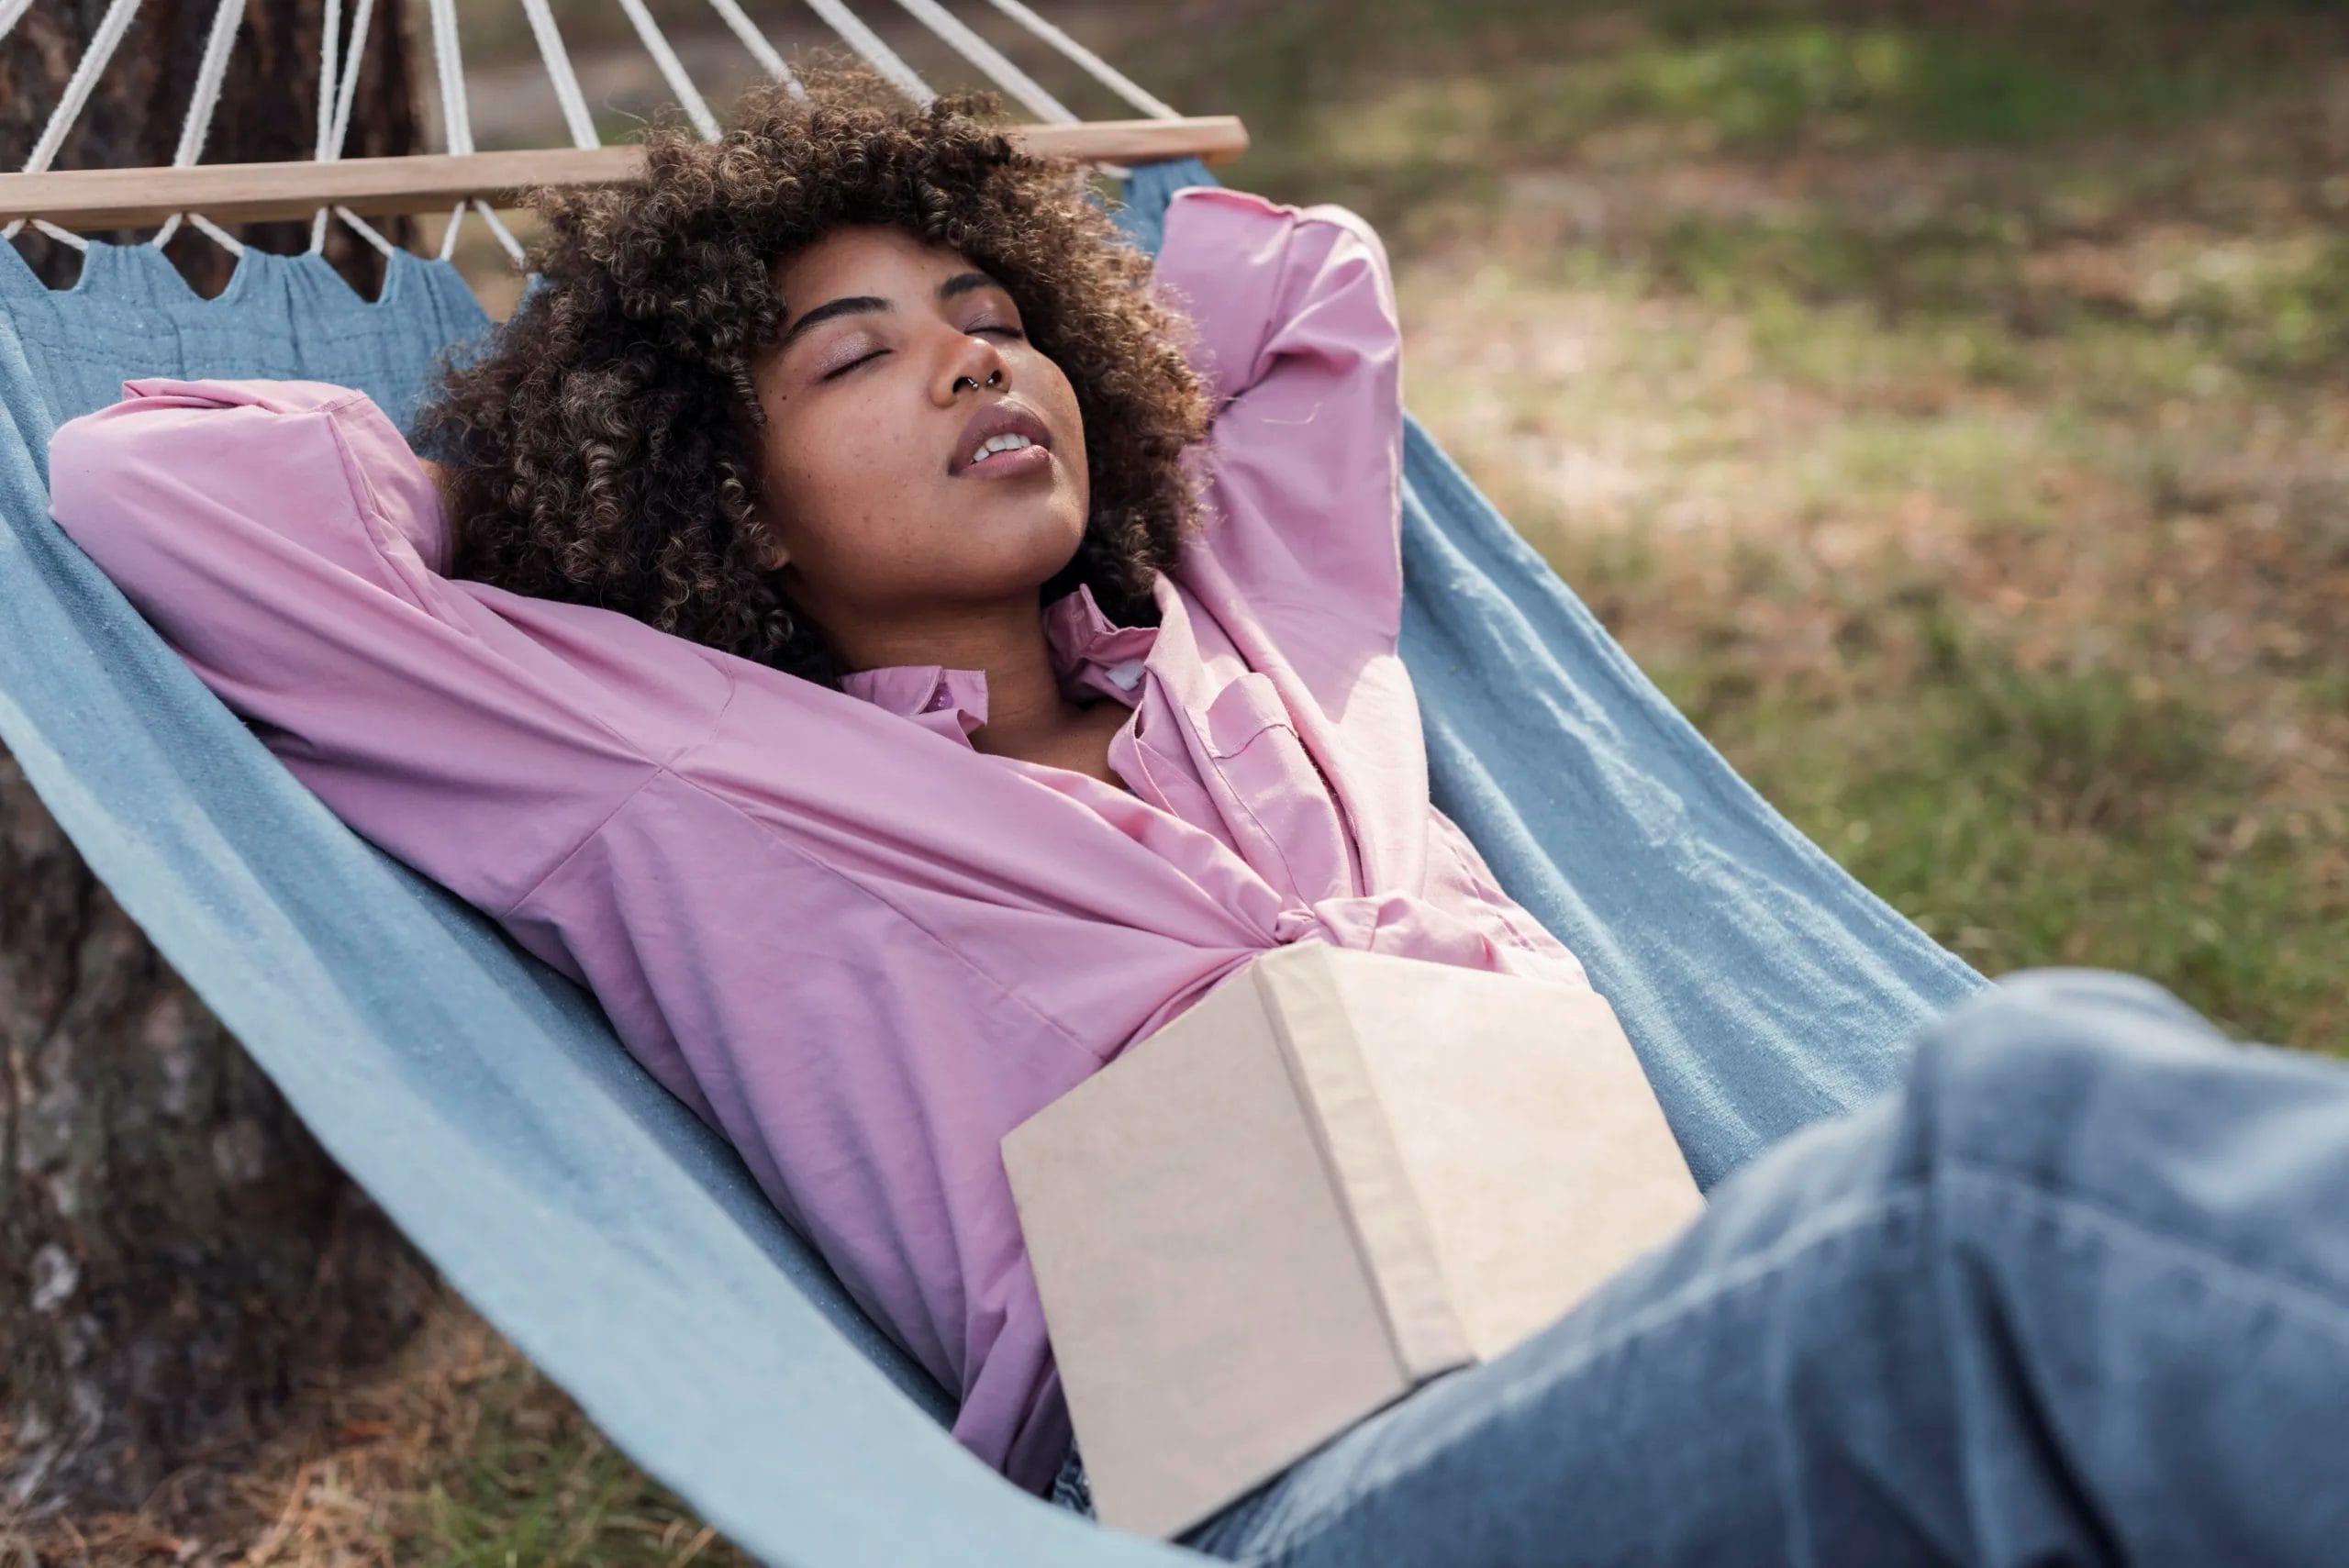 woman-relaxing-hammock-while-camping-outdoors-with-book; overcome burnout, burnout, overcoming burnout, how to overcome burnout, signs of burnout, symptoms of burnout, finding balance, work life balance, work=-life balance; reignite your passion, passion, Black woman, career coach, confidence coach